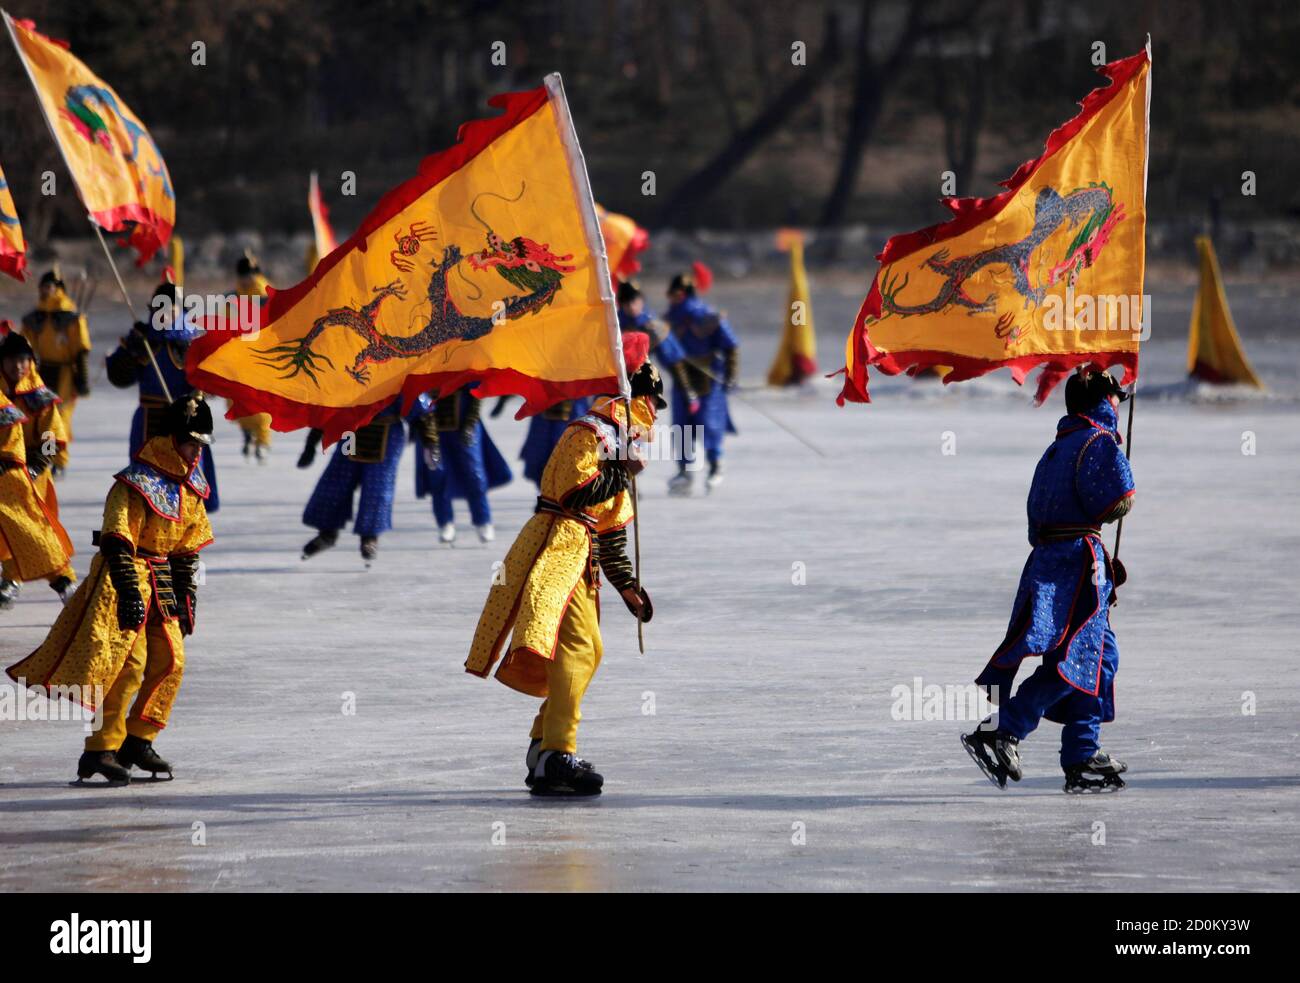 Performers dressed in Qing Dynasty (1644-1911) costumes hold dragon flags  as they skate on a frozen lake during a performance on the third day of the  Chinese Lunar New Year at the